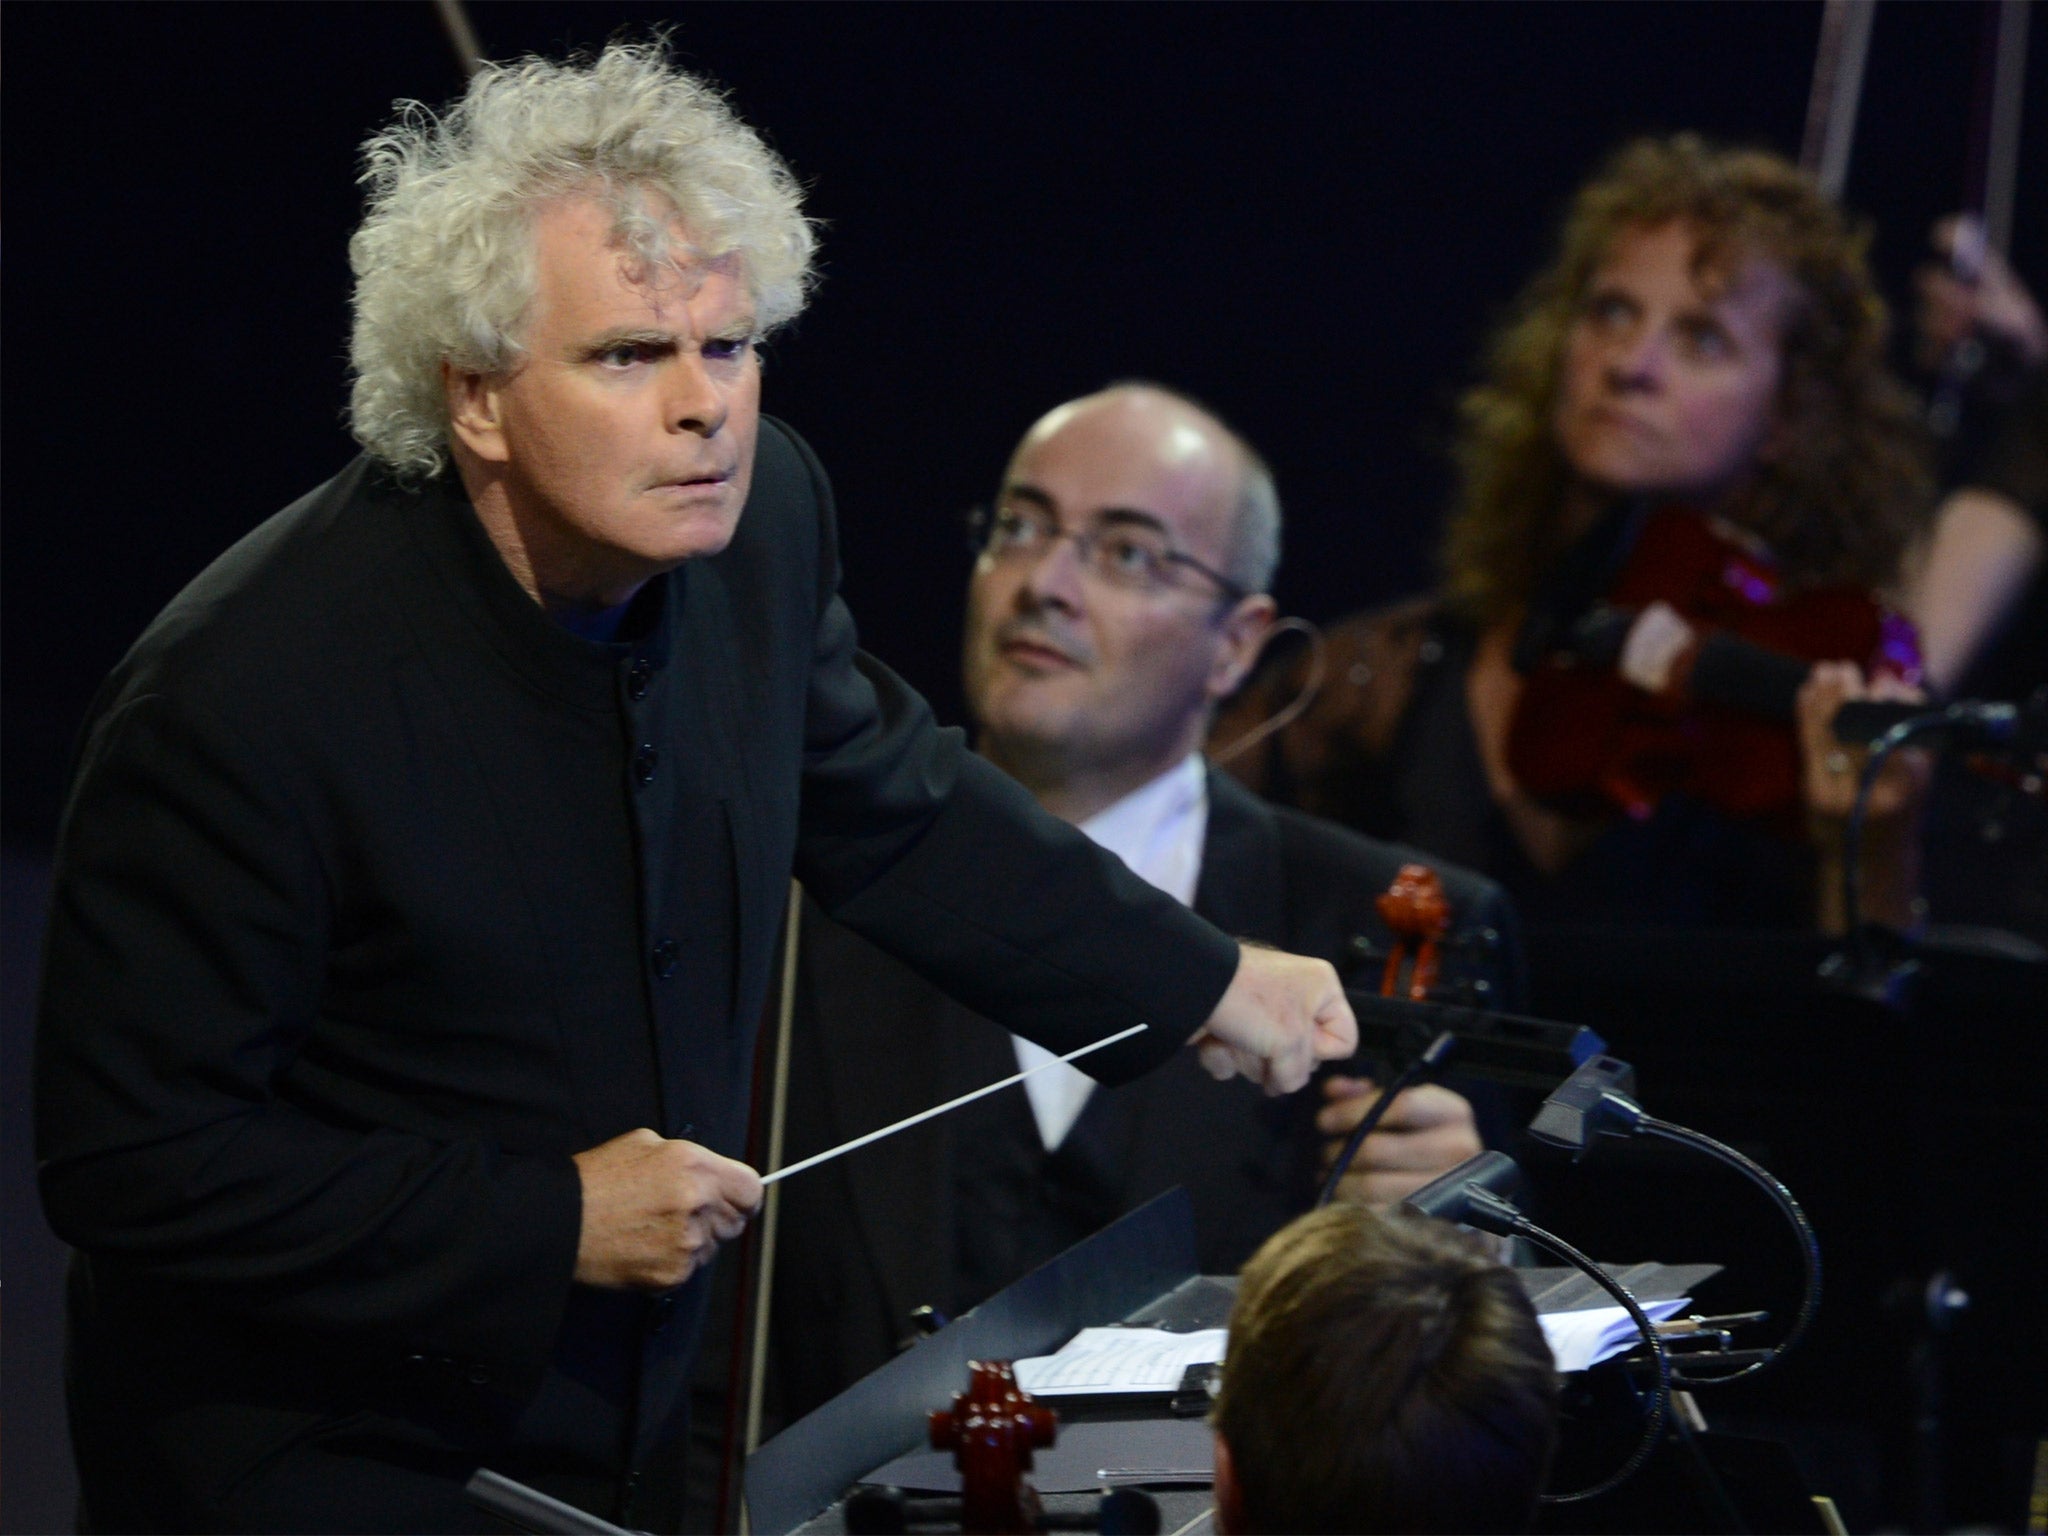 Sir Simon Rattle will be joining the London Symphony Orchestra in 2017